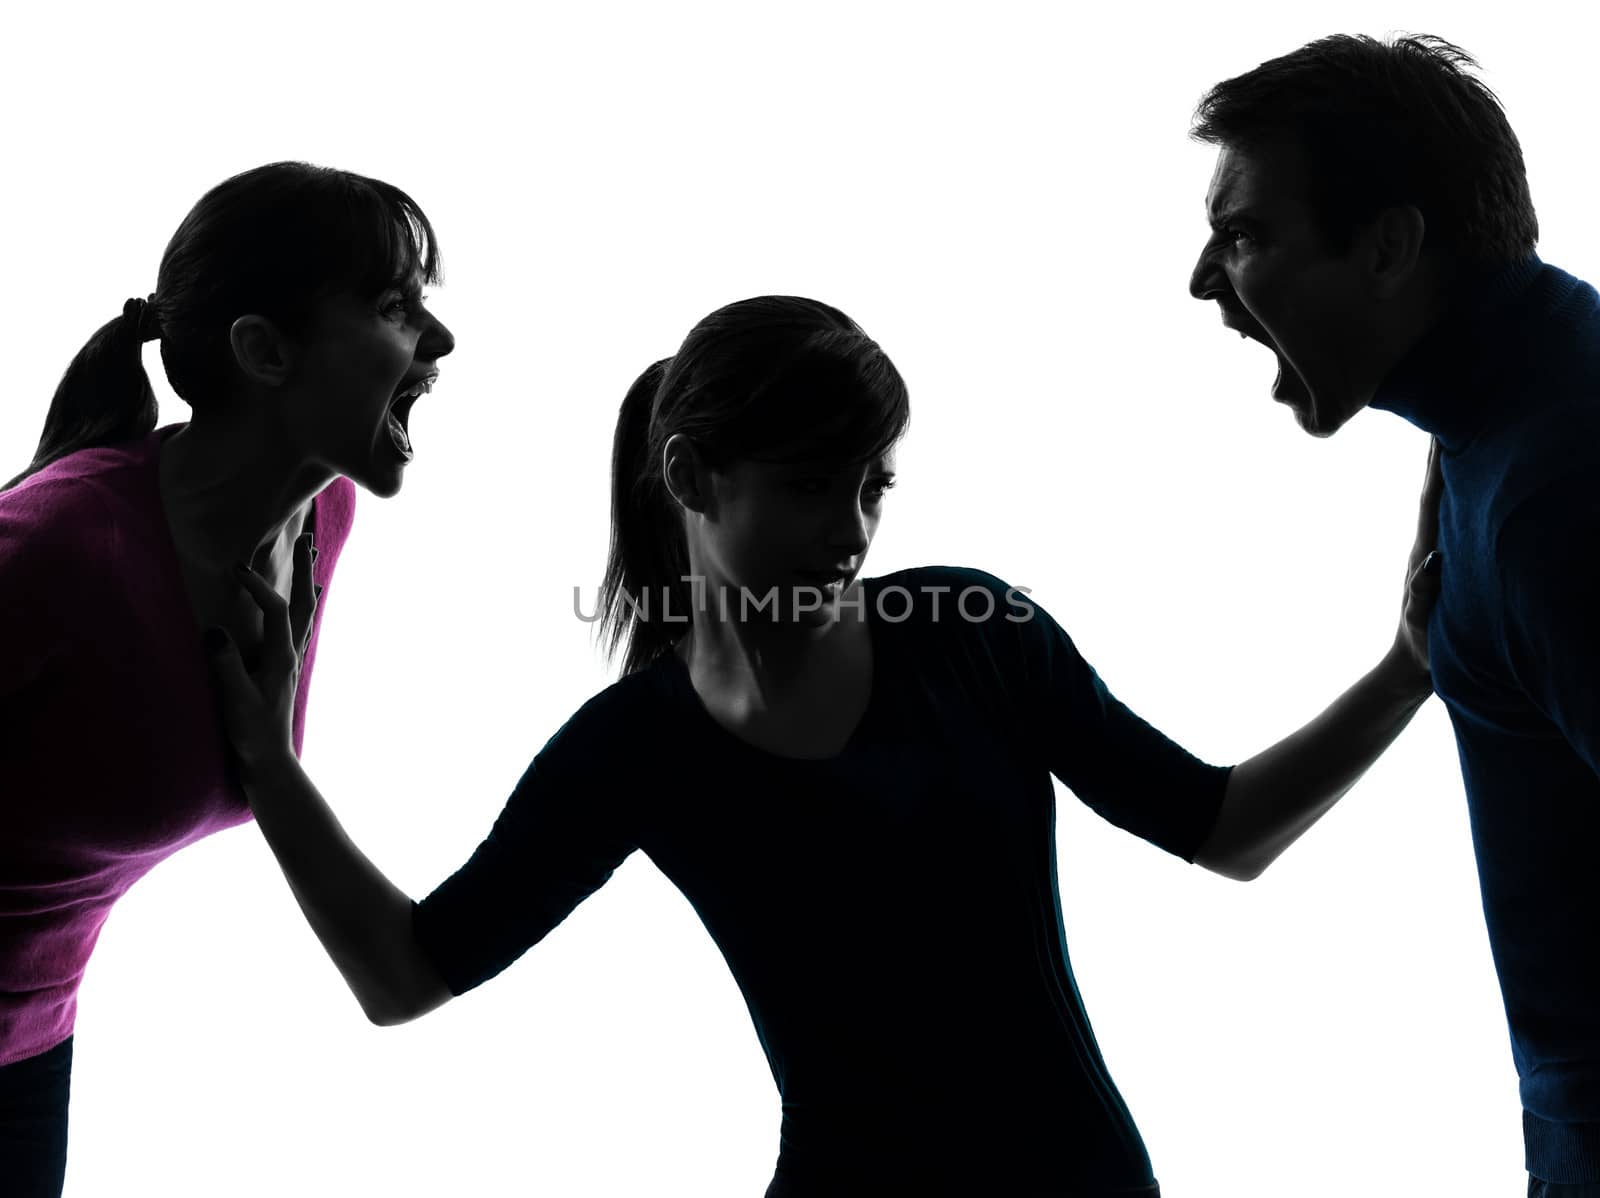  family father mother daughter dispute screaming silhouette by PIXSTILL